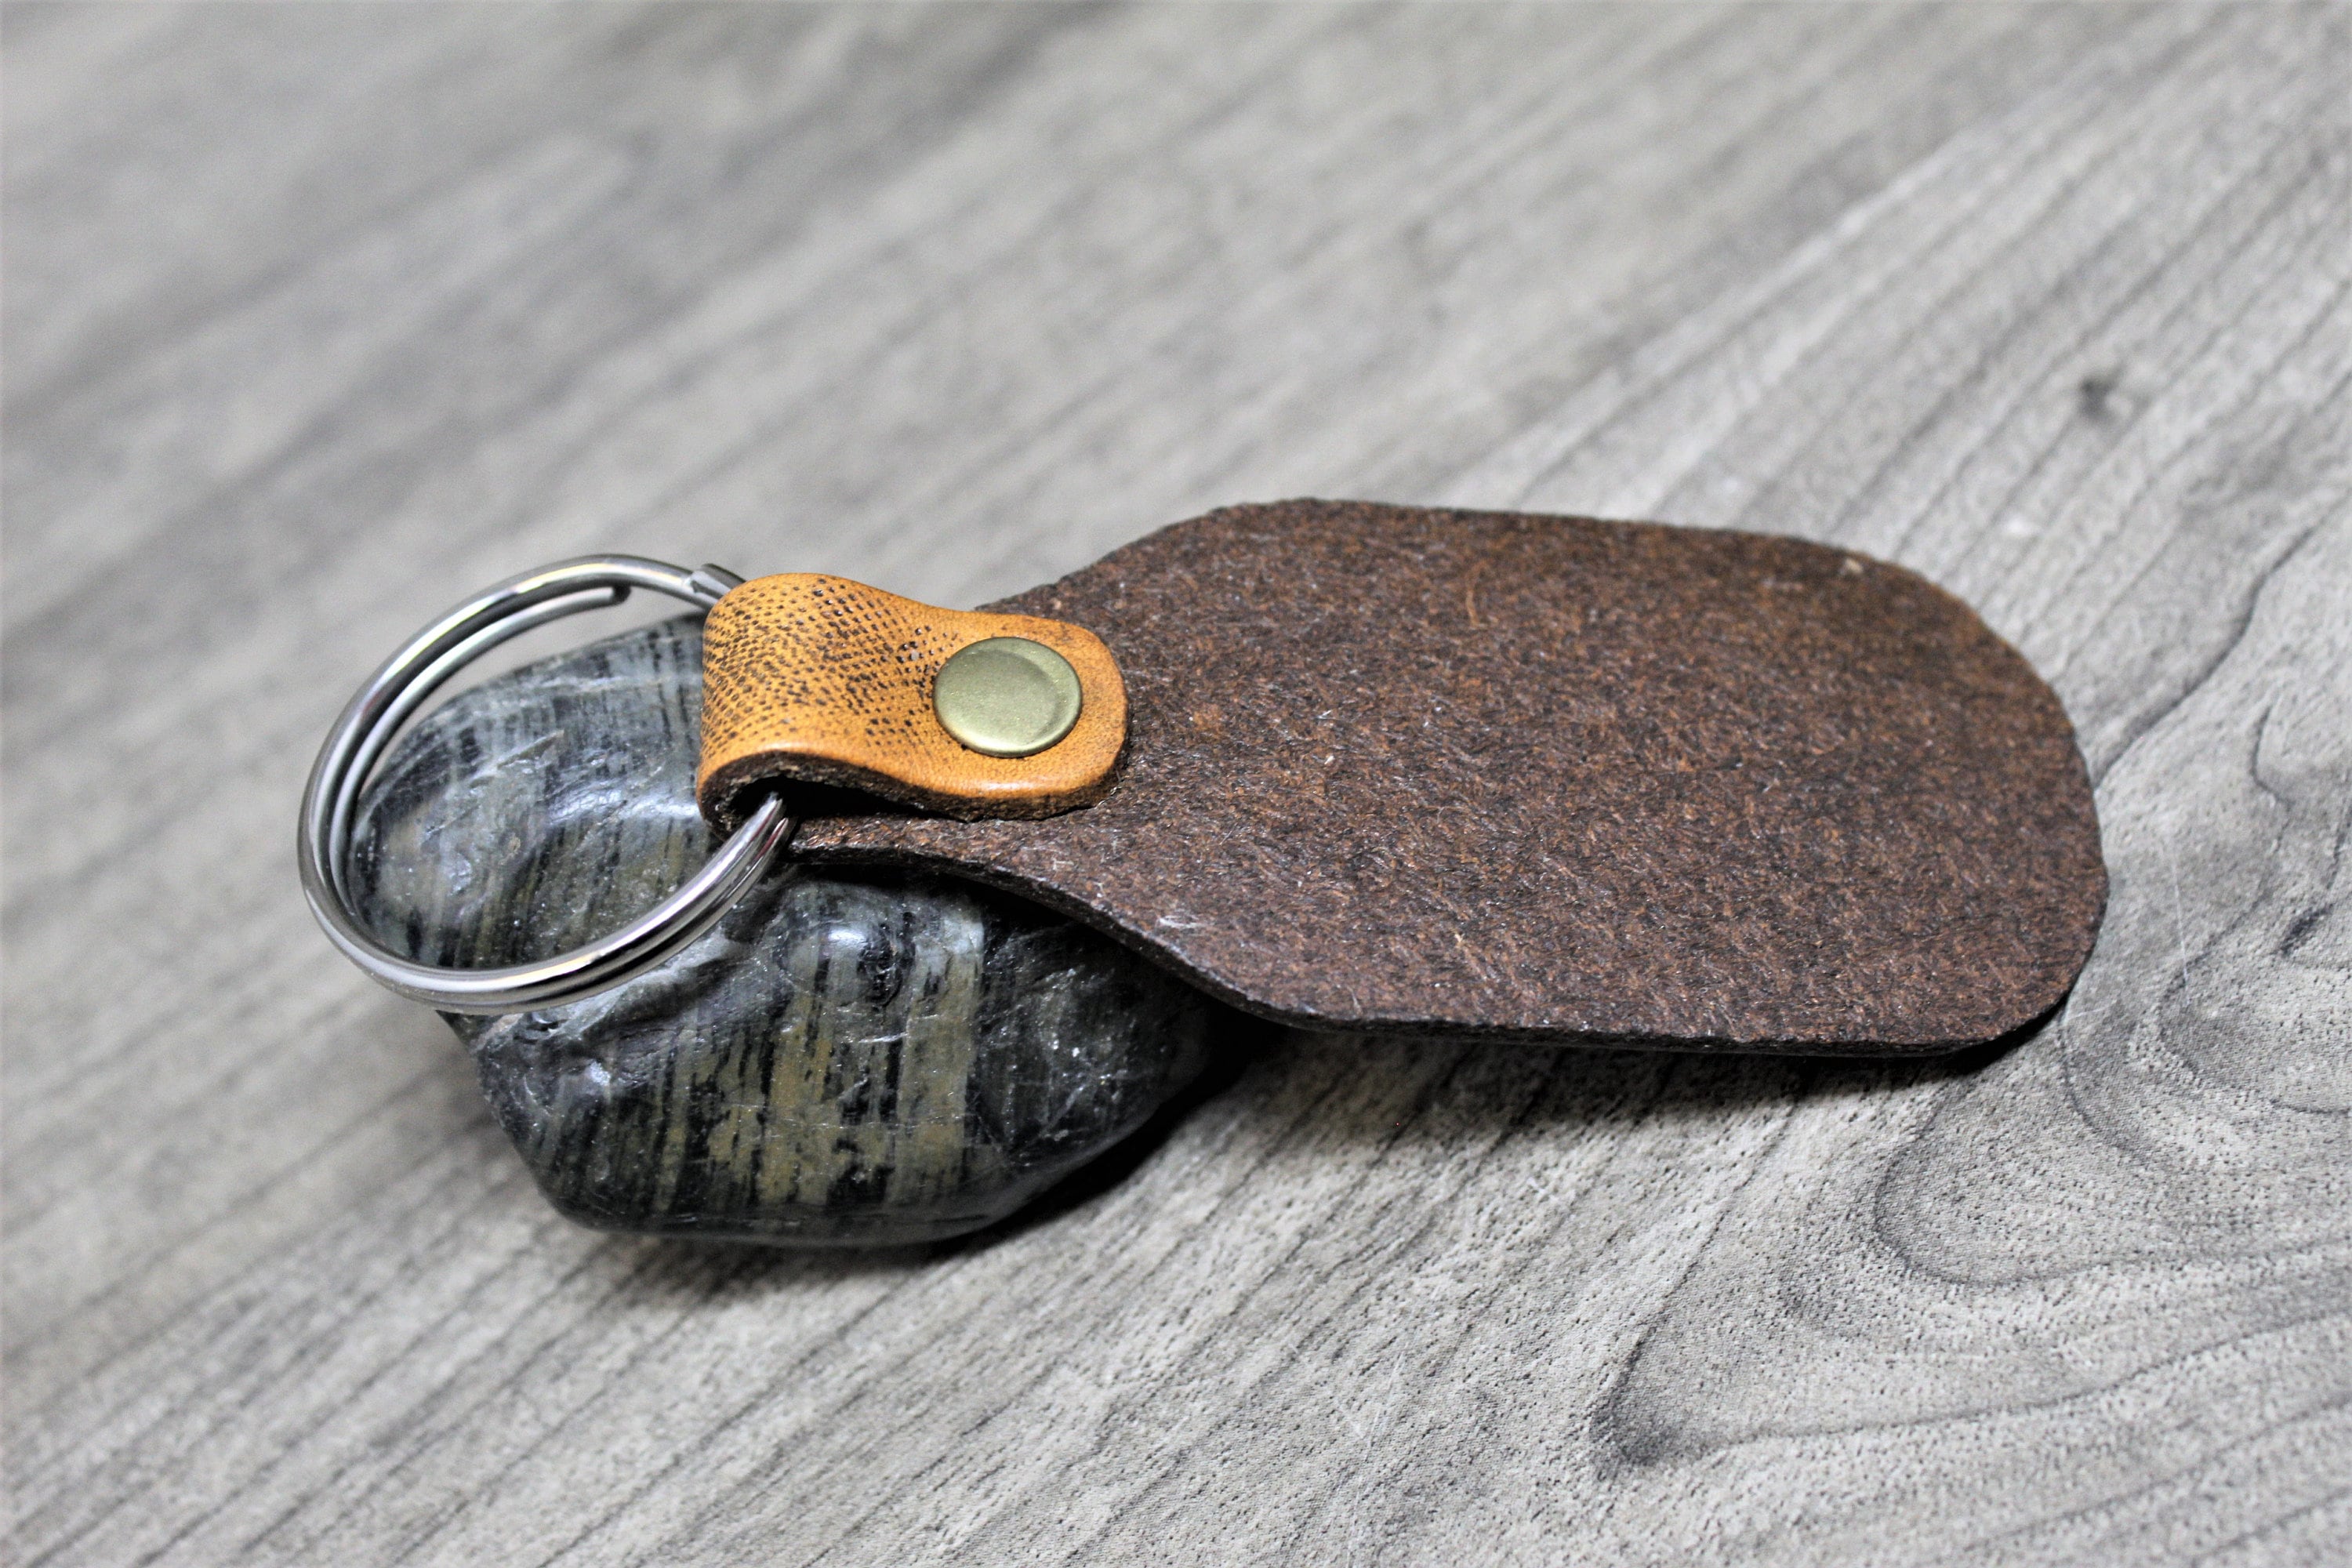 Crappie Leather Key Fob, Crappie Fishing, Men's Christmas Gift, Men's  Stocking Stuffer, Brother Christmas, Fishing Gifts, Men's Keychain 